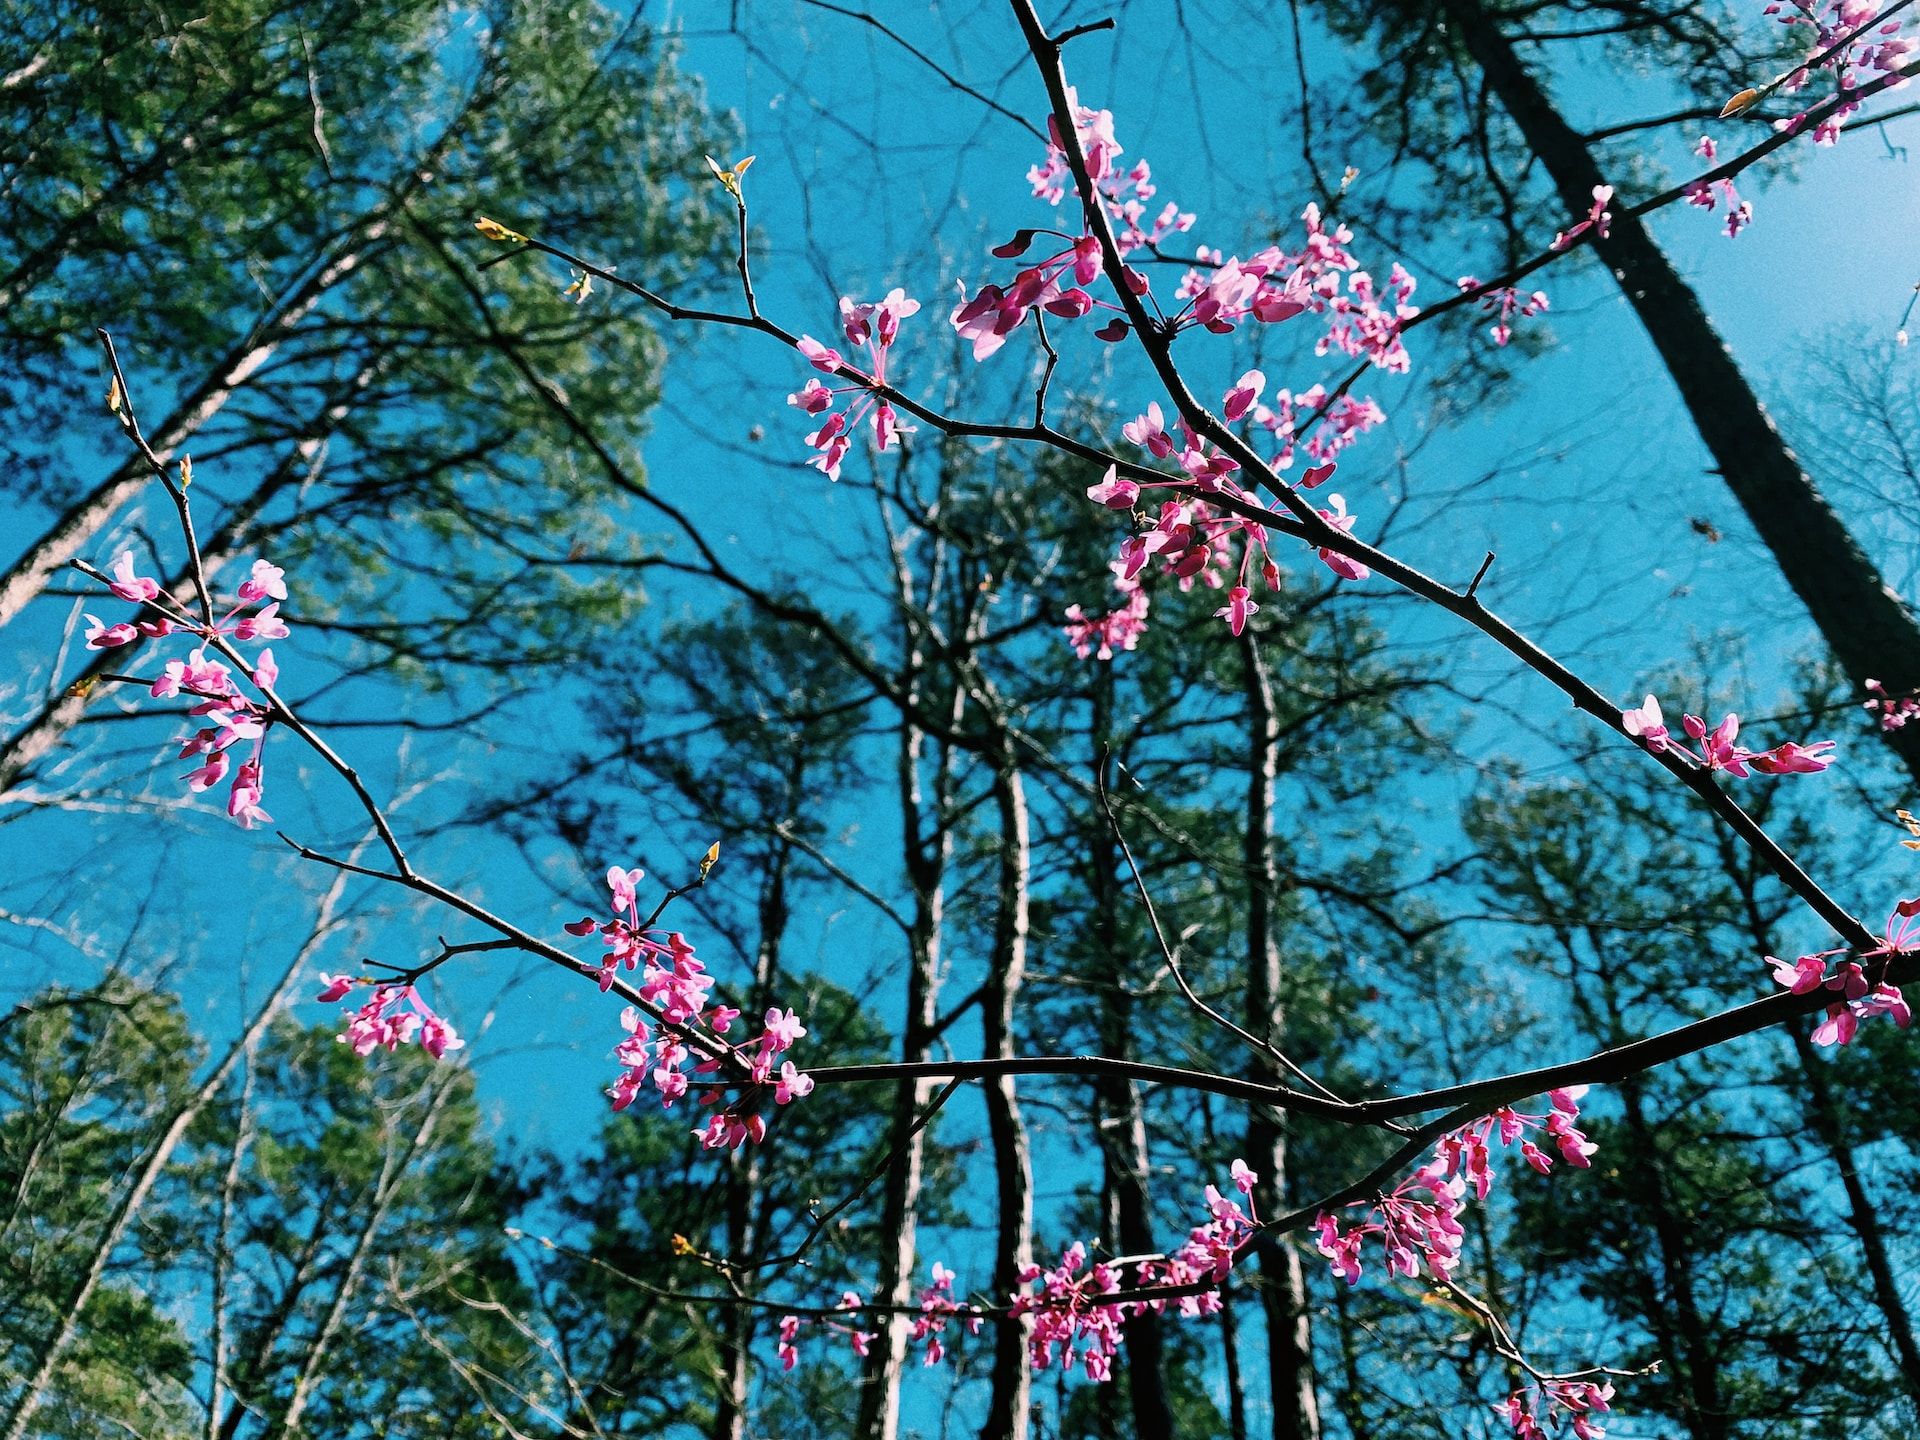 Flowering trees at Allegany State Park